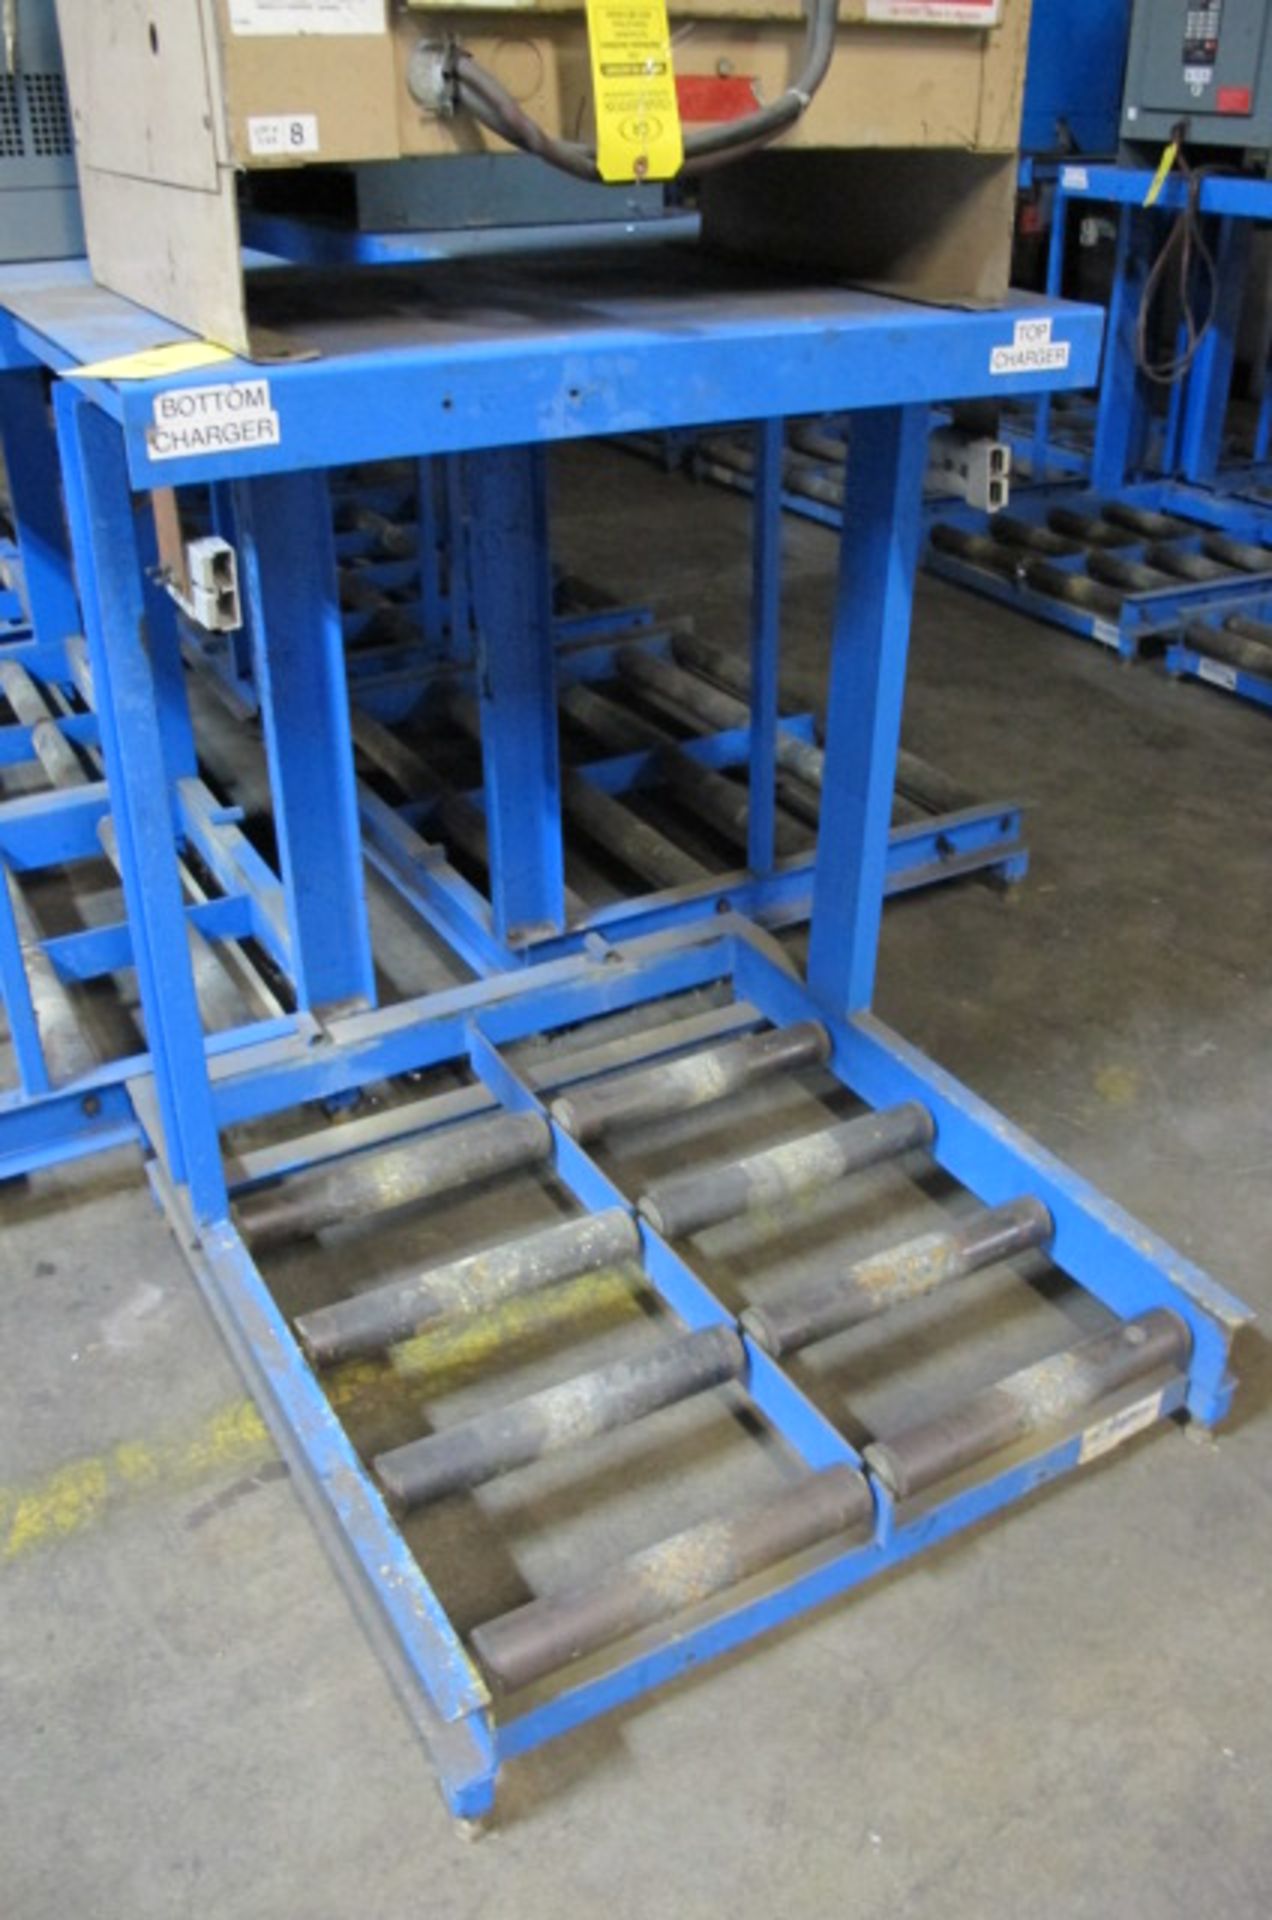 ASSORTED BATTERY CHARGING STATIONS 7694 OH 120, Lyons, Ohio 43523 - all Gaylord plastic pallets